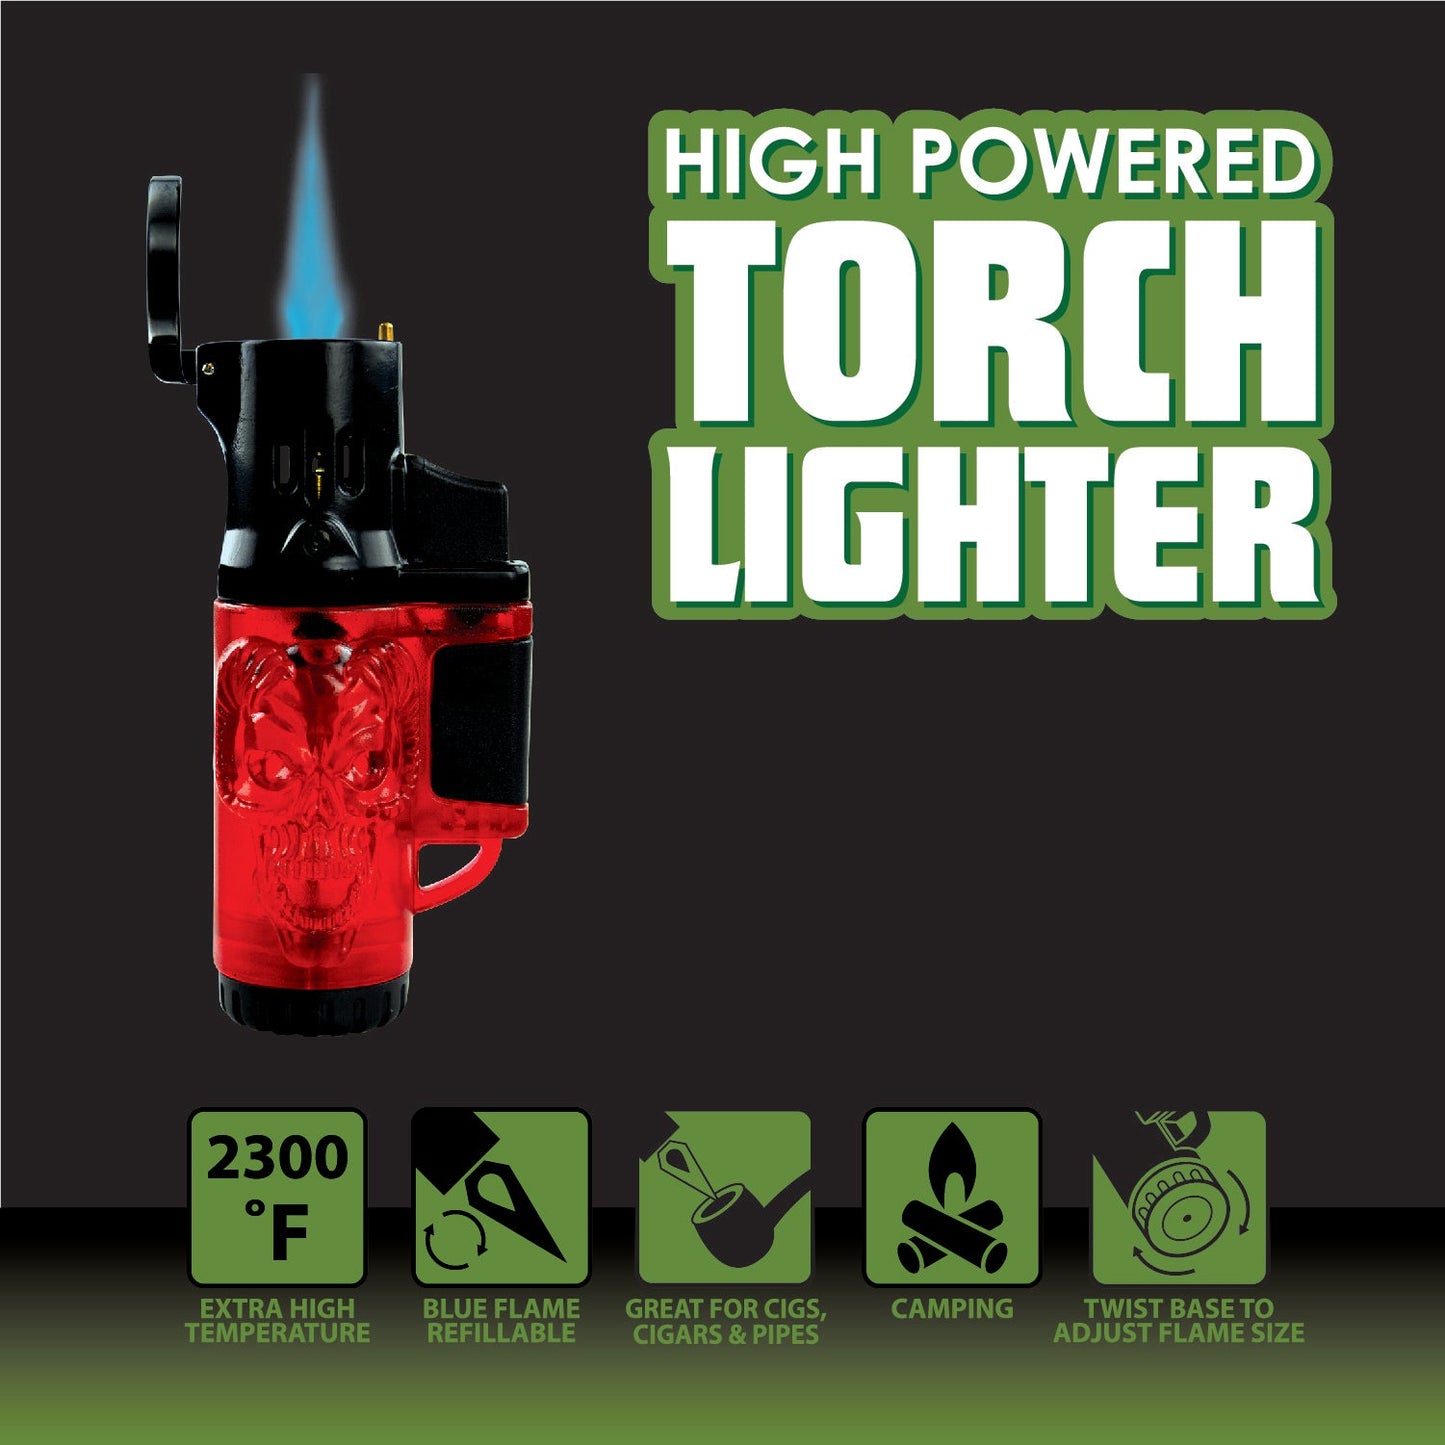 ITEM NUMBER 021915 MOLDED TORCH LIGHTER B 12 PIECES PER DISPLAY